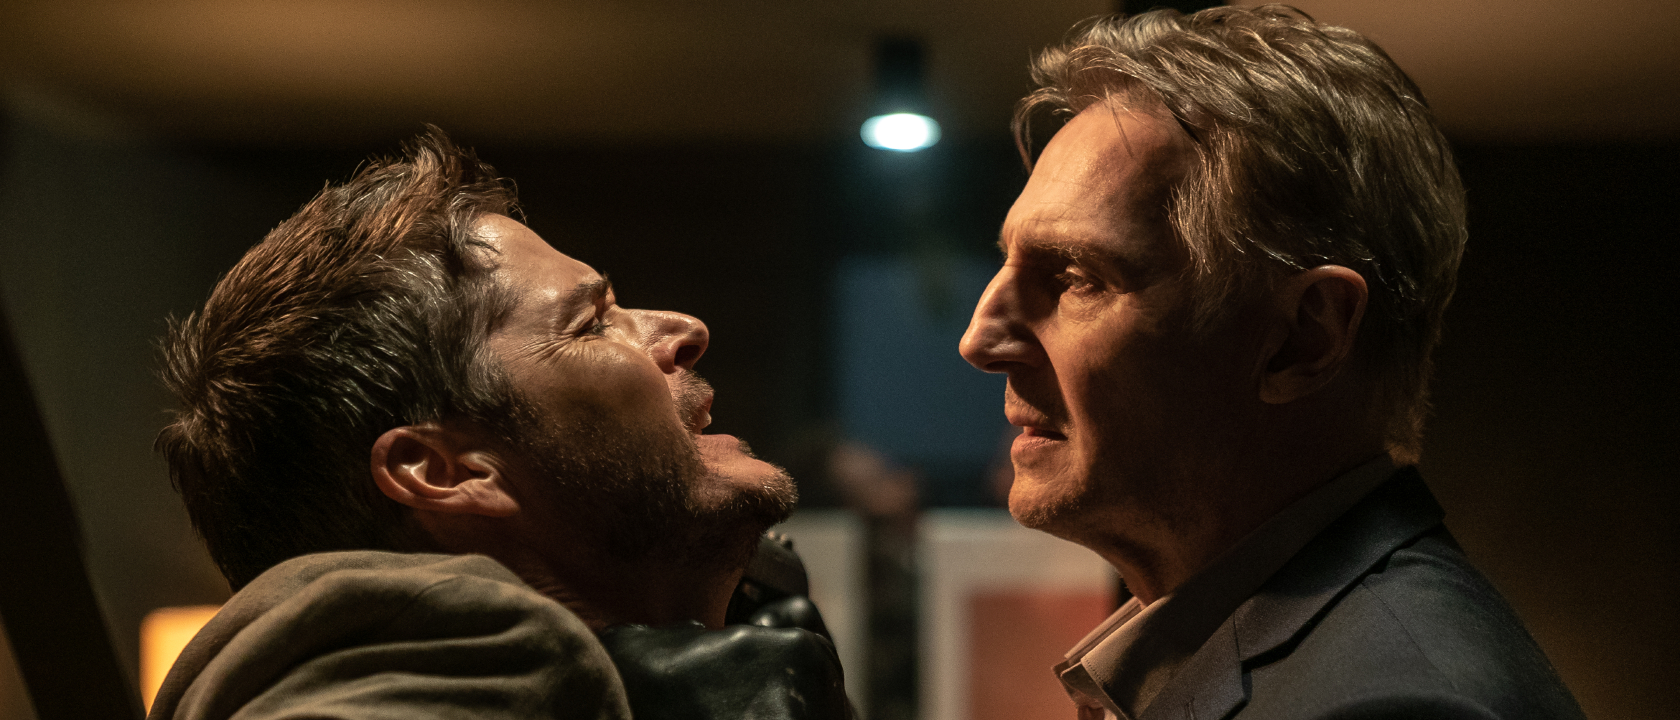 Memory Review: Liam Neeson Gets To Flex His Action And Acting Muscles In A Solid Thriller